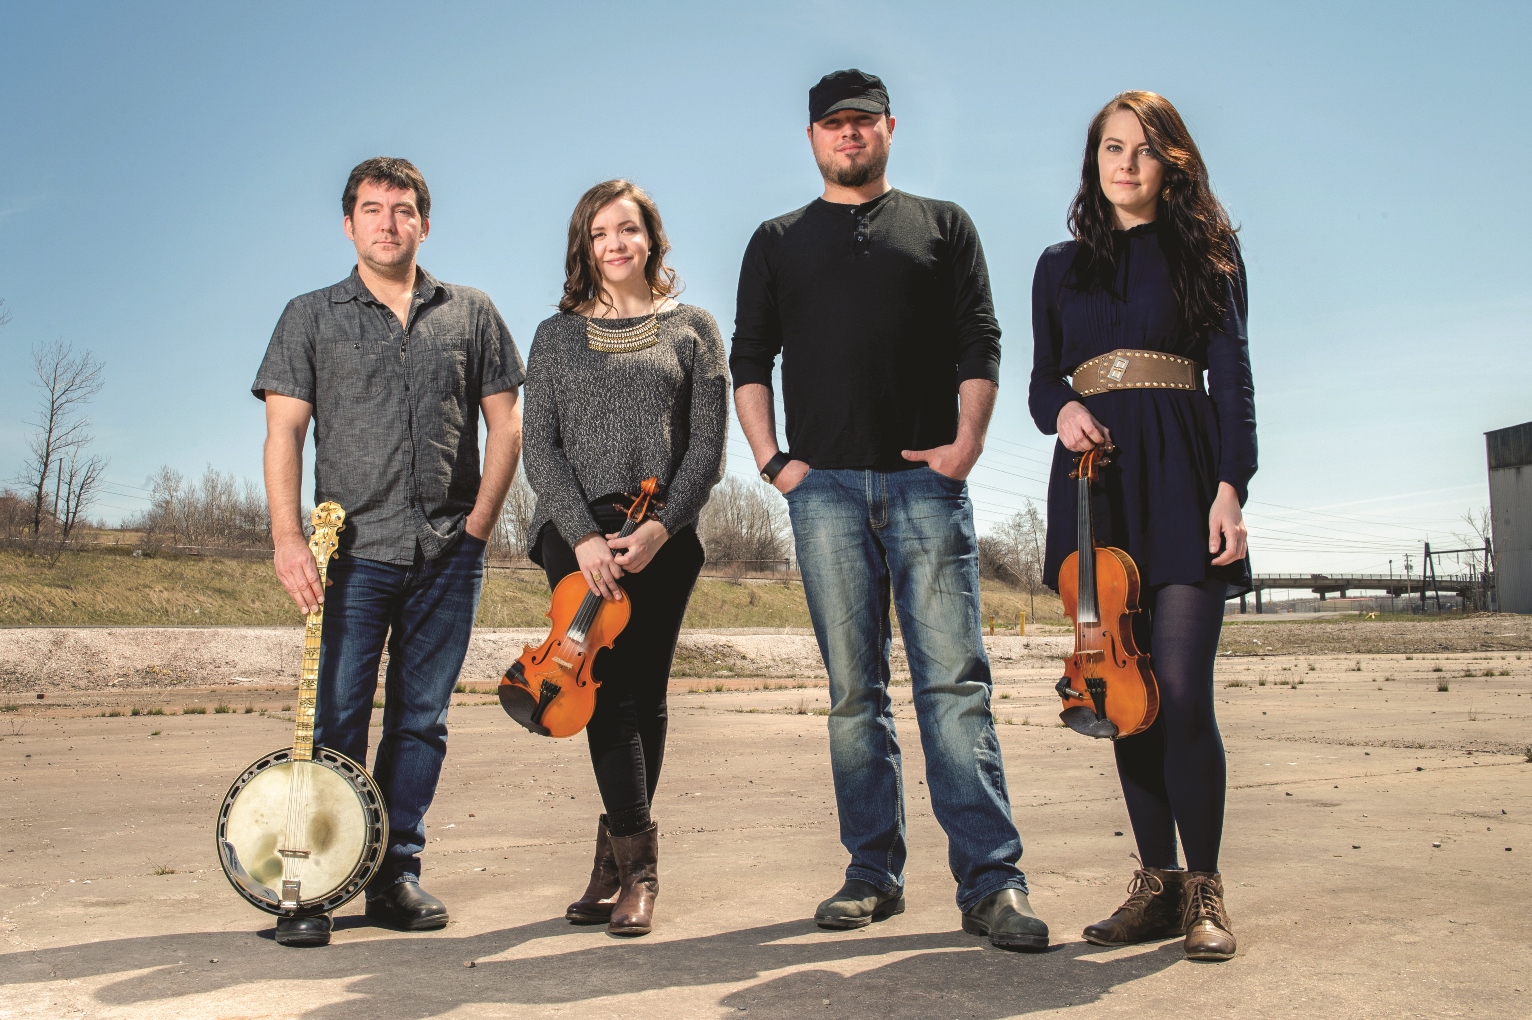 CÓIG is an ensemble of East Coast performers who were once a series of solo acts. Today, they have combined their talents to form an electrifying Celtic music super group.